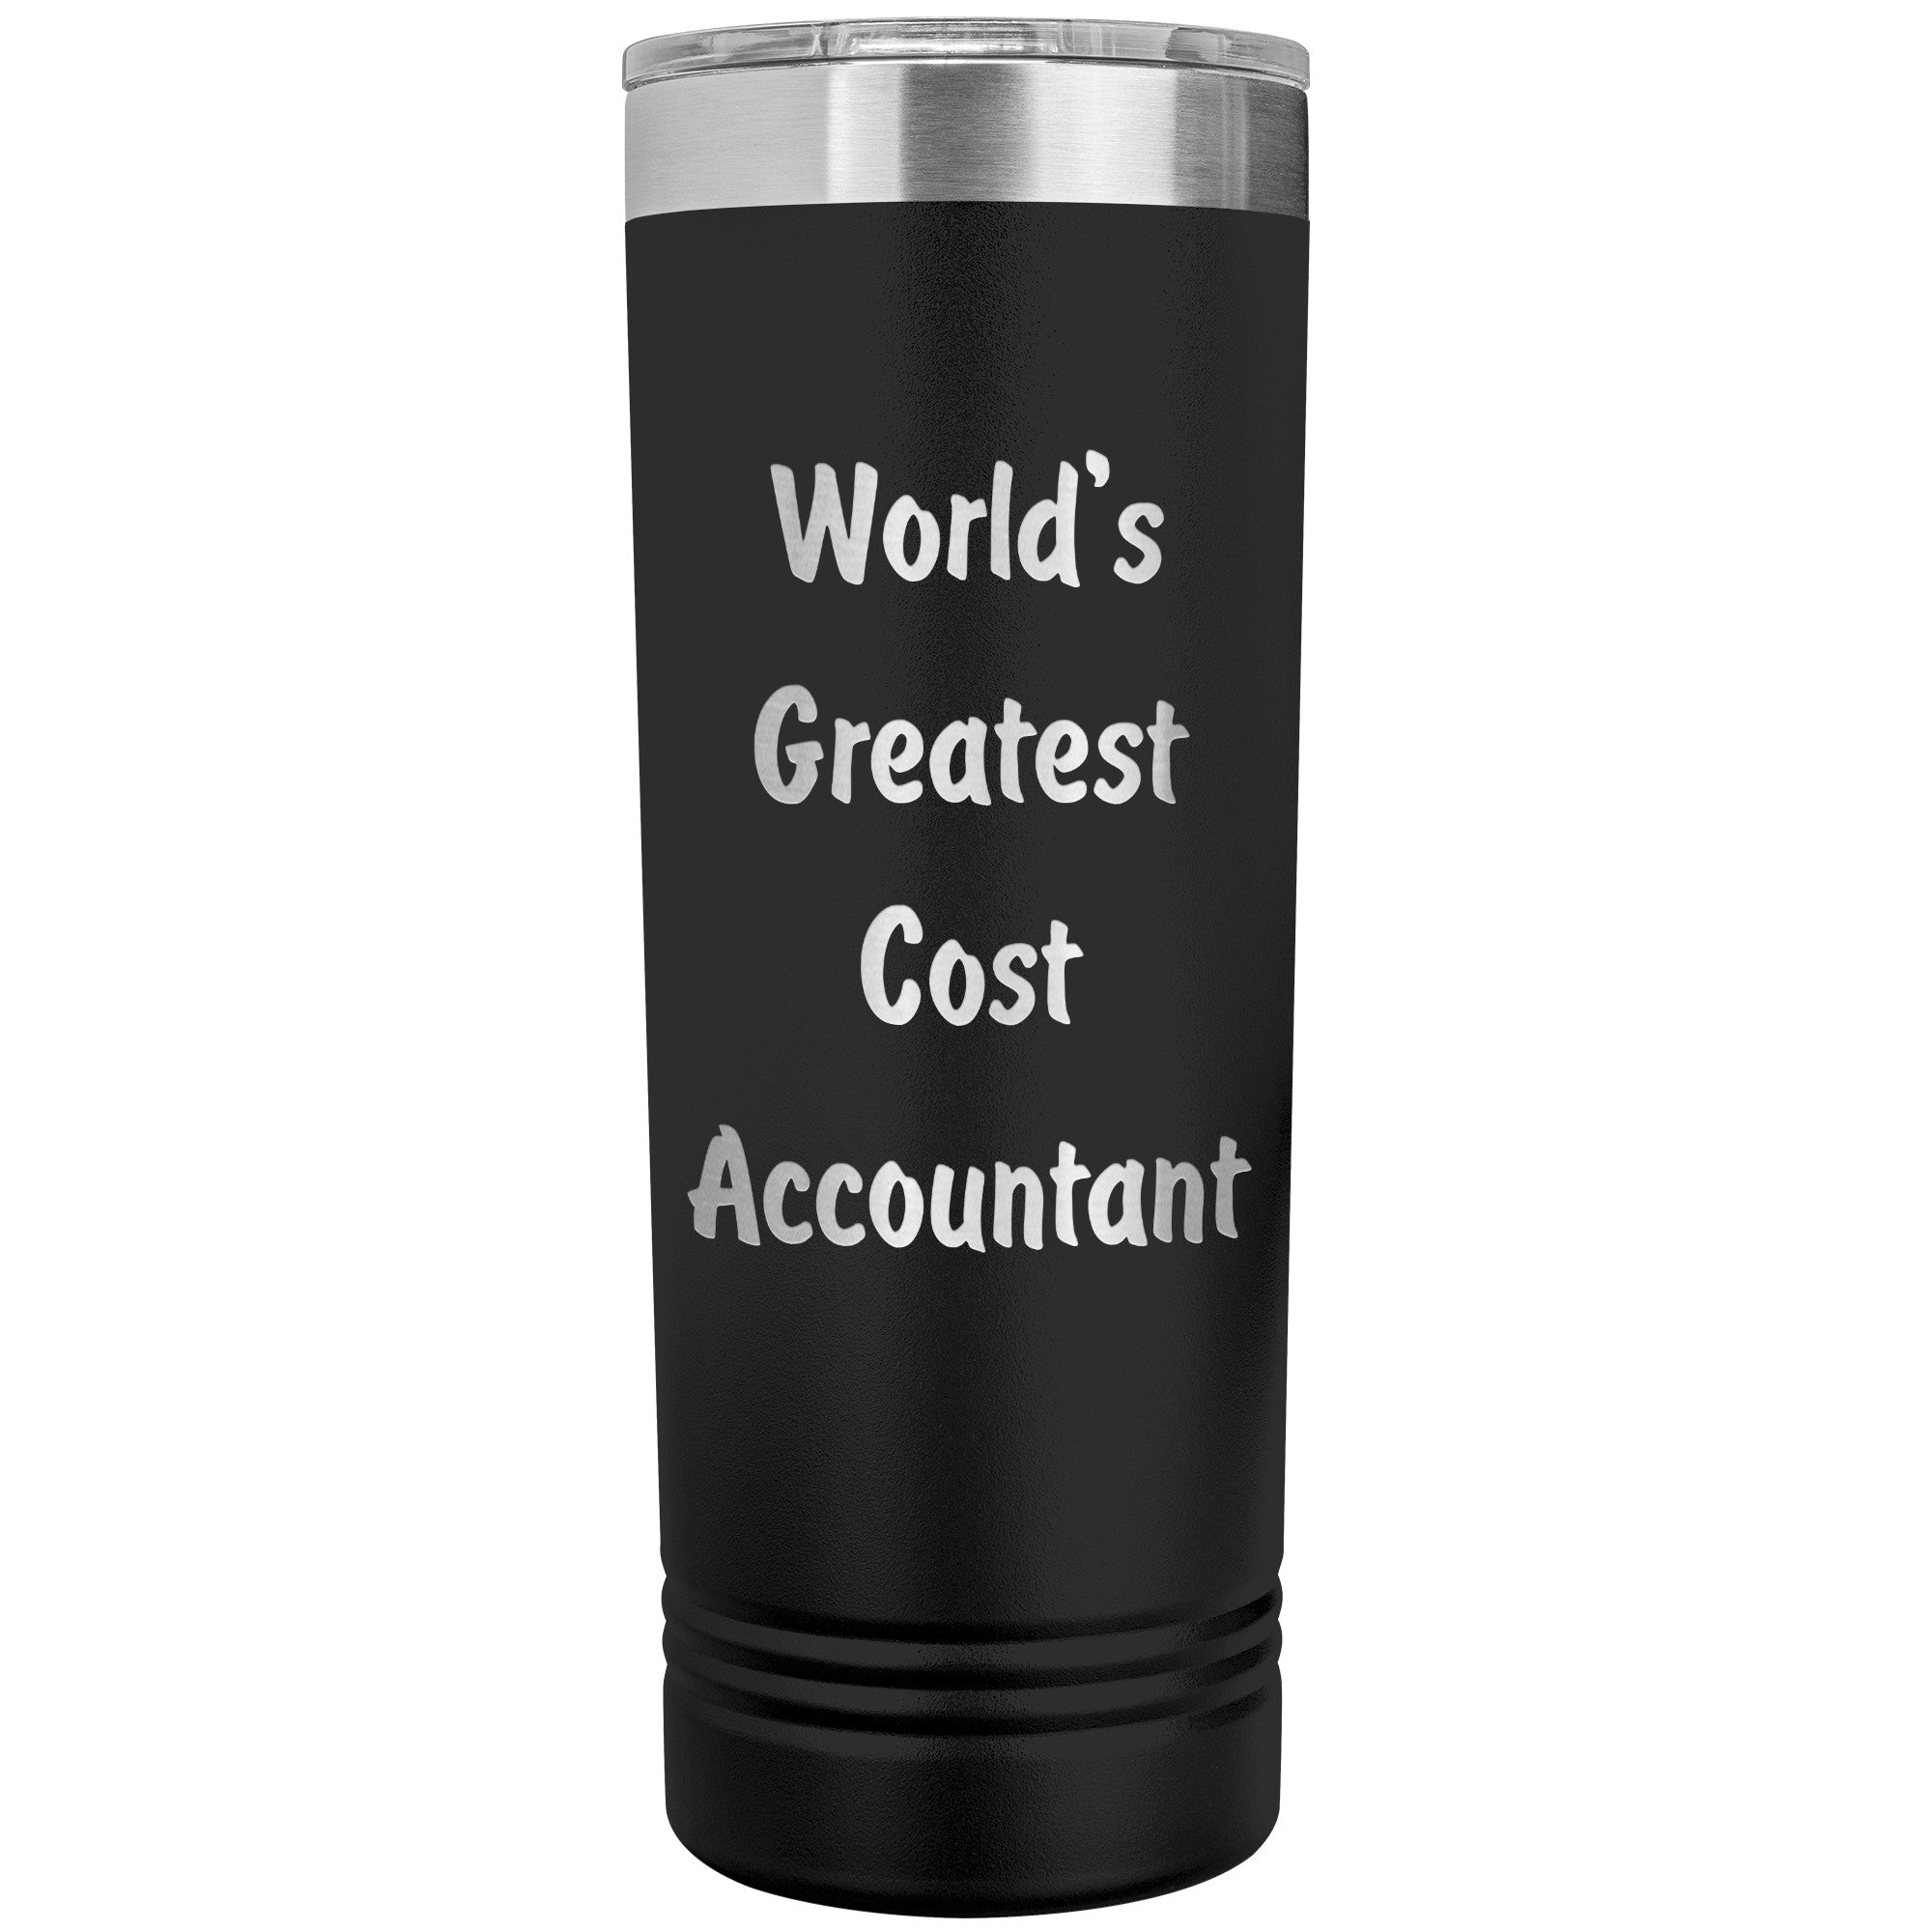 World's Greatest Cost Accountant - 22oz Insulated Skinny Tumbler